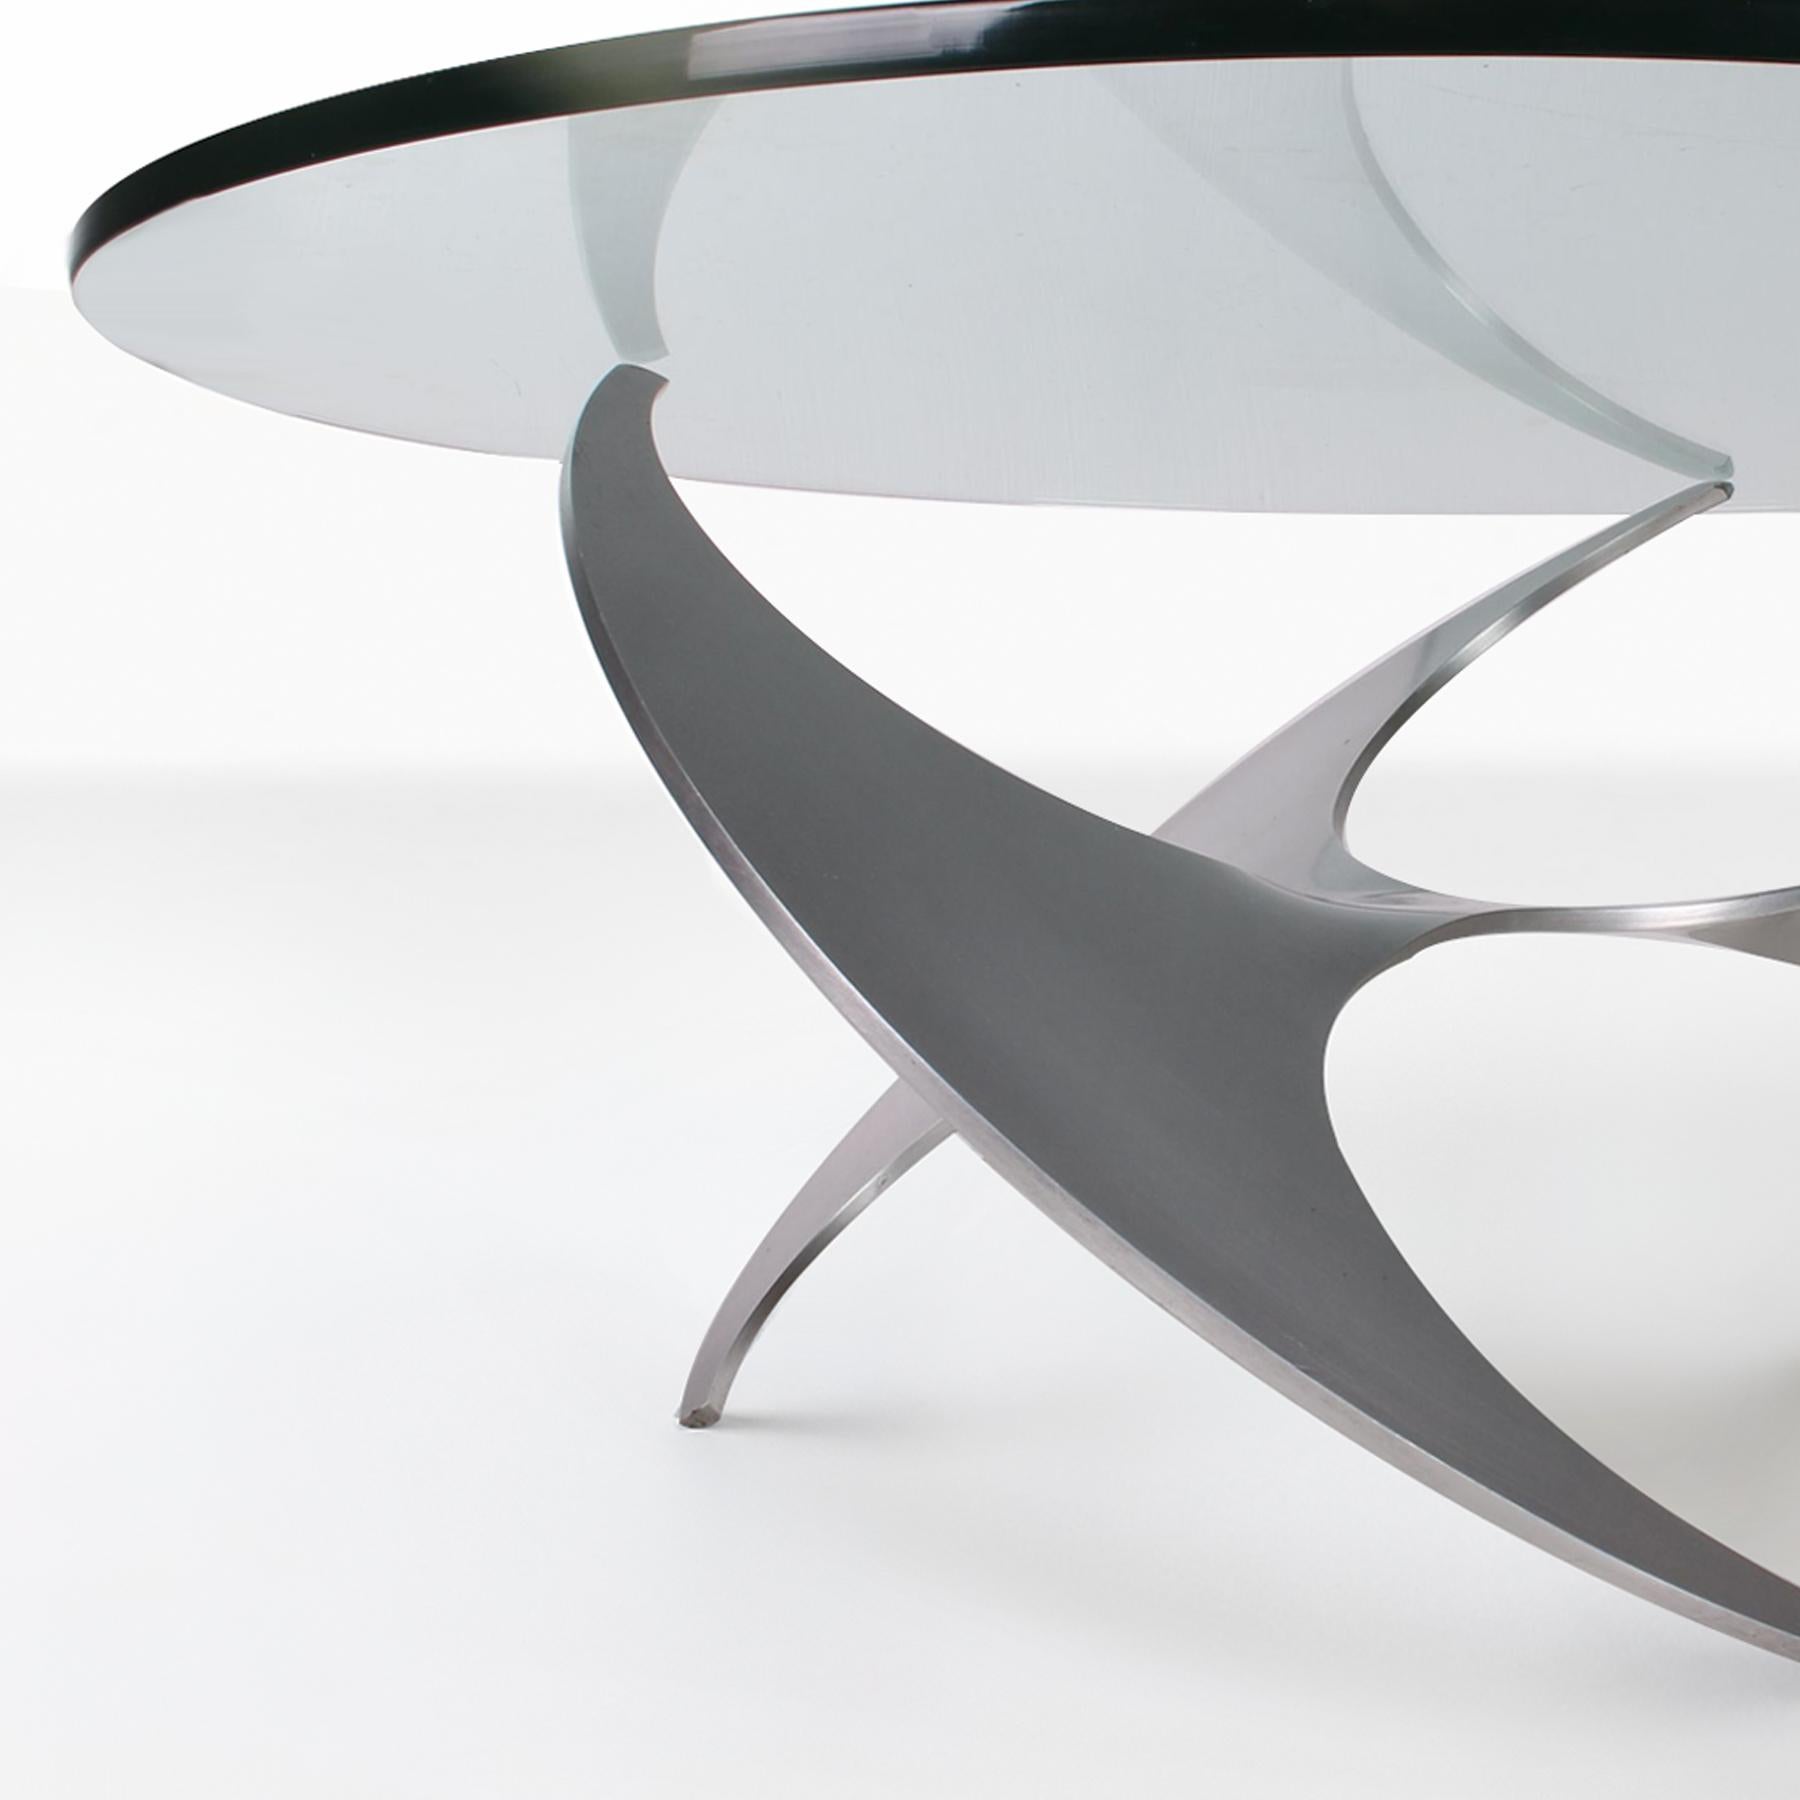 German 1960s Aluminium and Glass Coffee ‘Propeller’ Table by Knut Hesterberg 